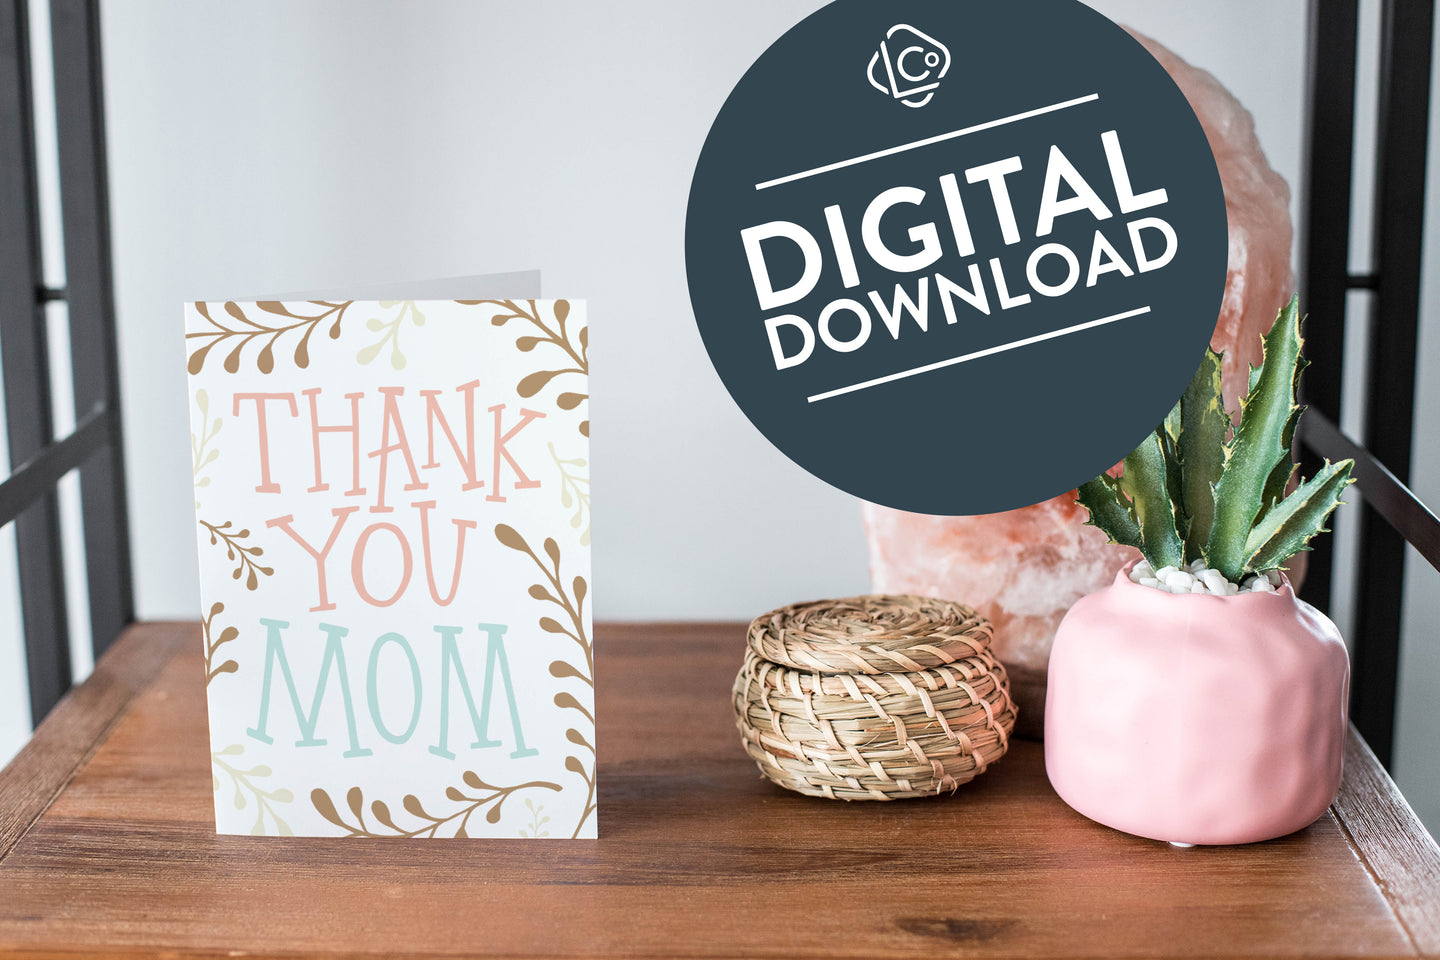 A card on a wood tabletop and on the right side of the card is a woven basket, a pink plant pot with a cactus in it and a pink crystal rock. The card features the words “Thank You Mom” with illustrated plant leaves. The words 